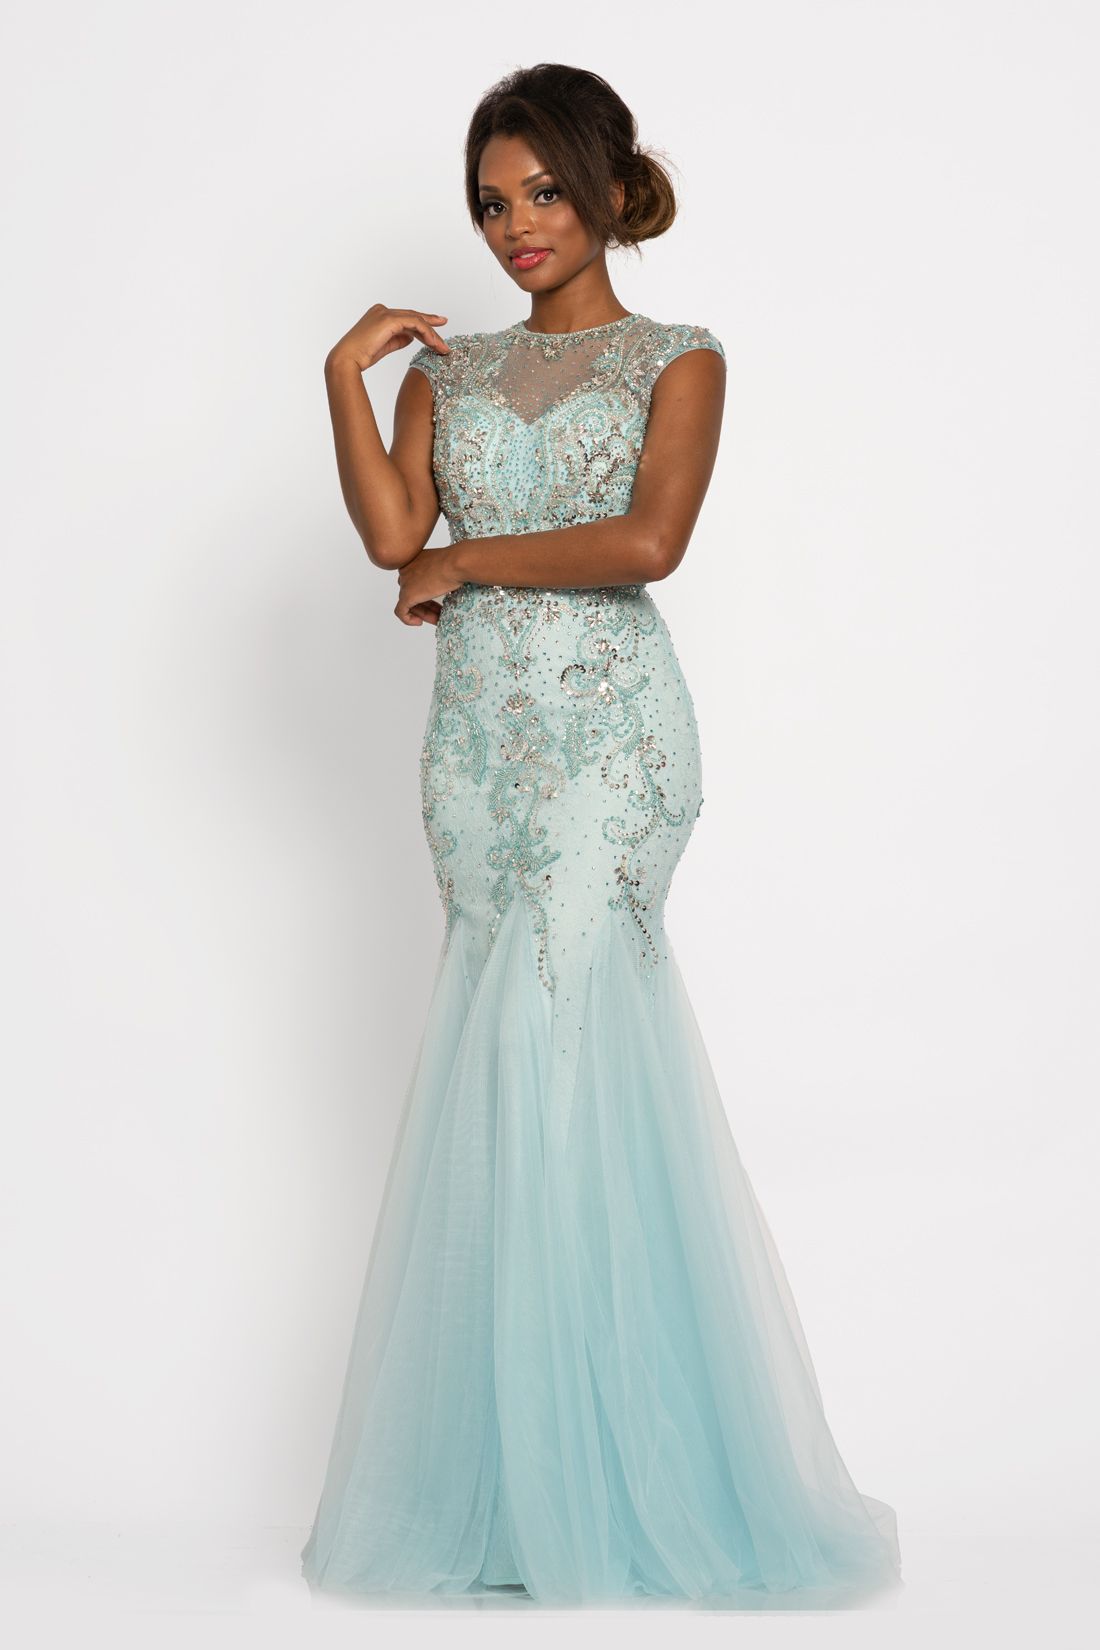 Johnathan Kayne 9039 Illusion Lace Evening Dress Cap Sleeve Mermaid Prom Dress Pageant gown